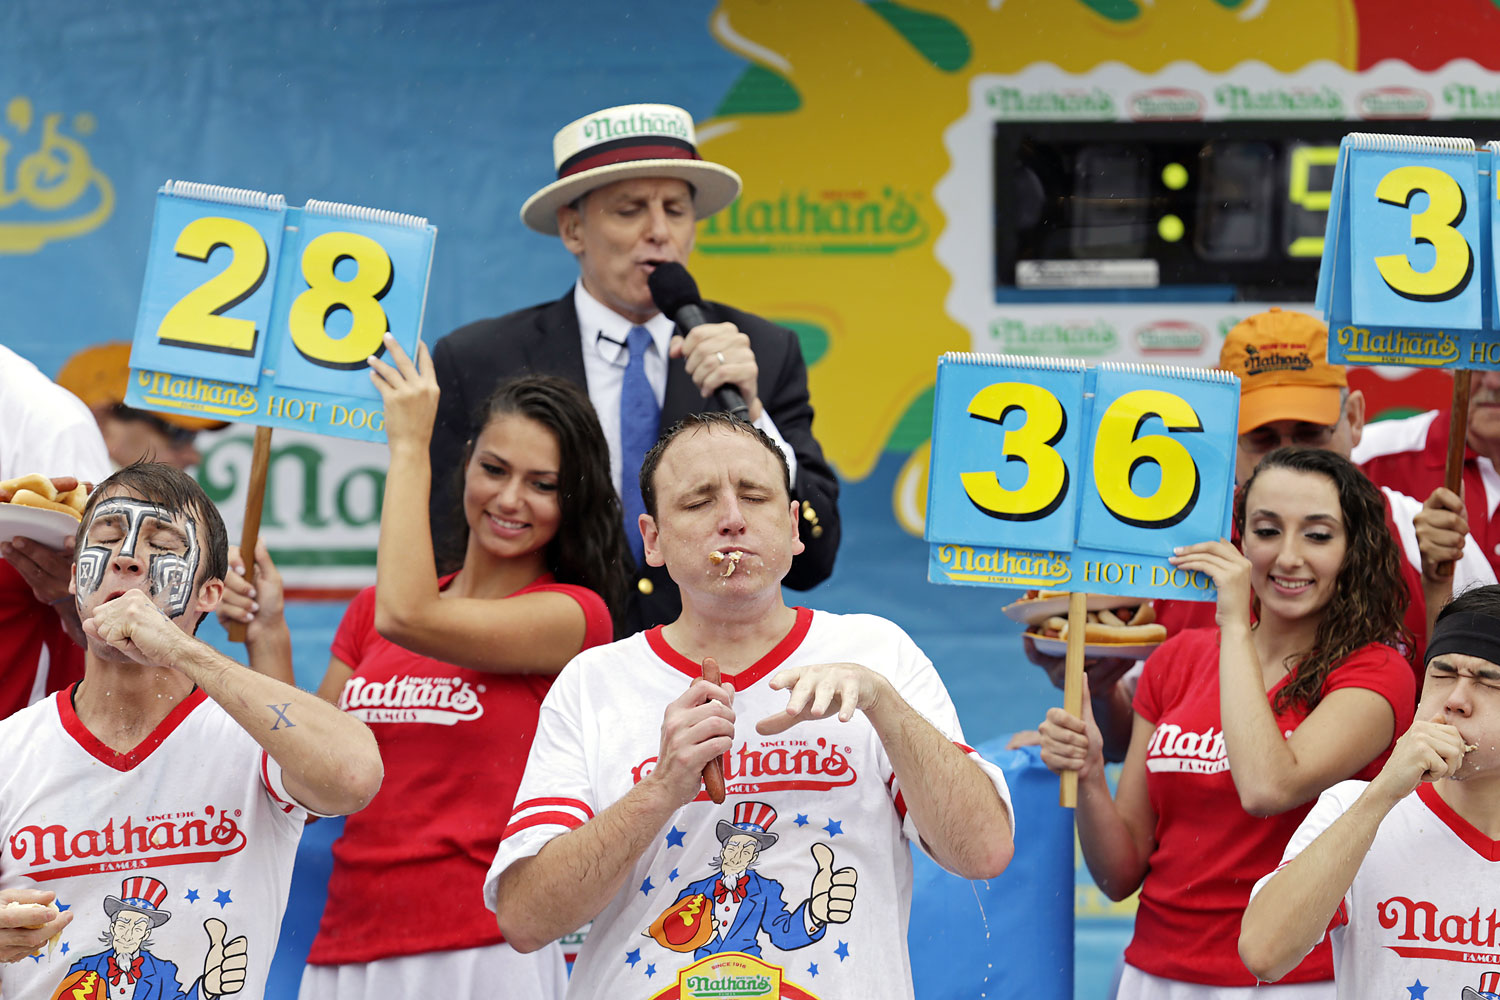 Champion eater's Joey Chestnut, center, Matt Stonie, right, and Tim 'Eater X' Janus, left, compete in Nathan's Famous Fourth of July International Hot-dog eating contest in Coney Island, July 4, 2014.